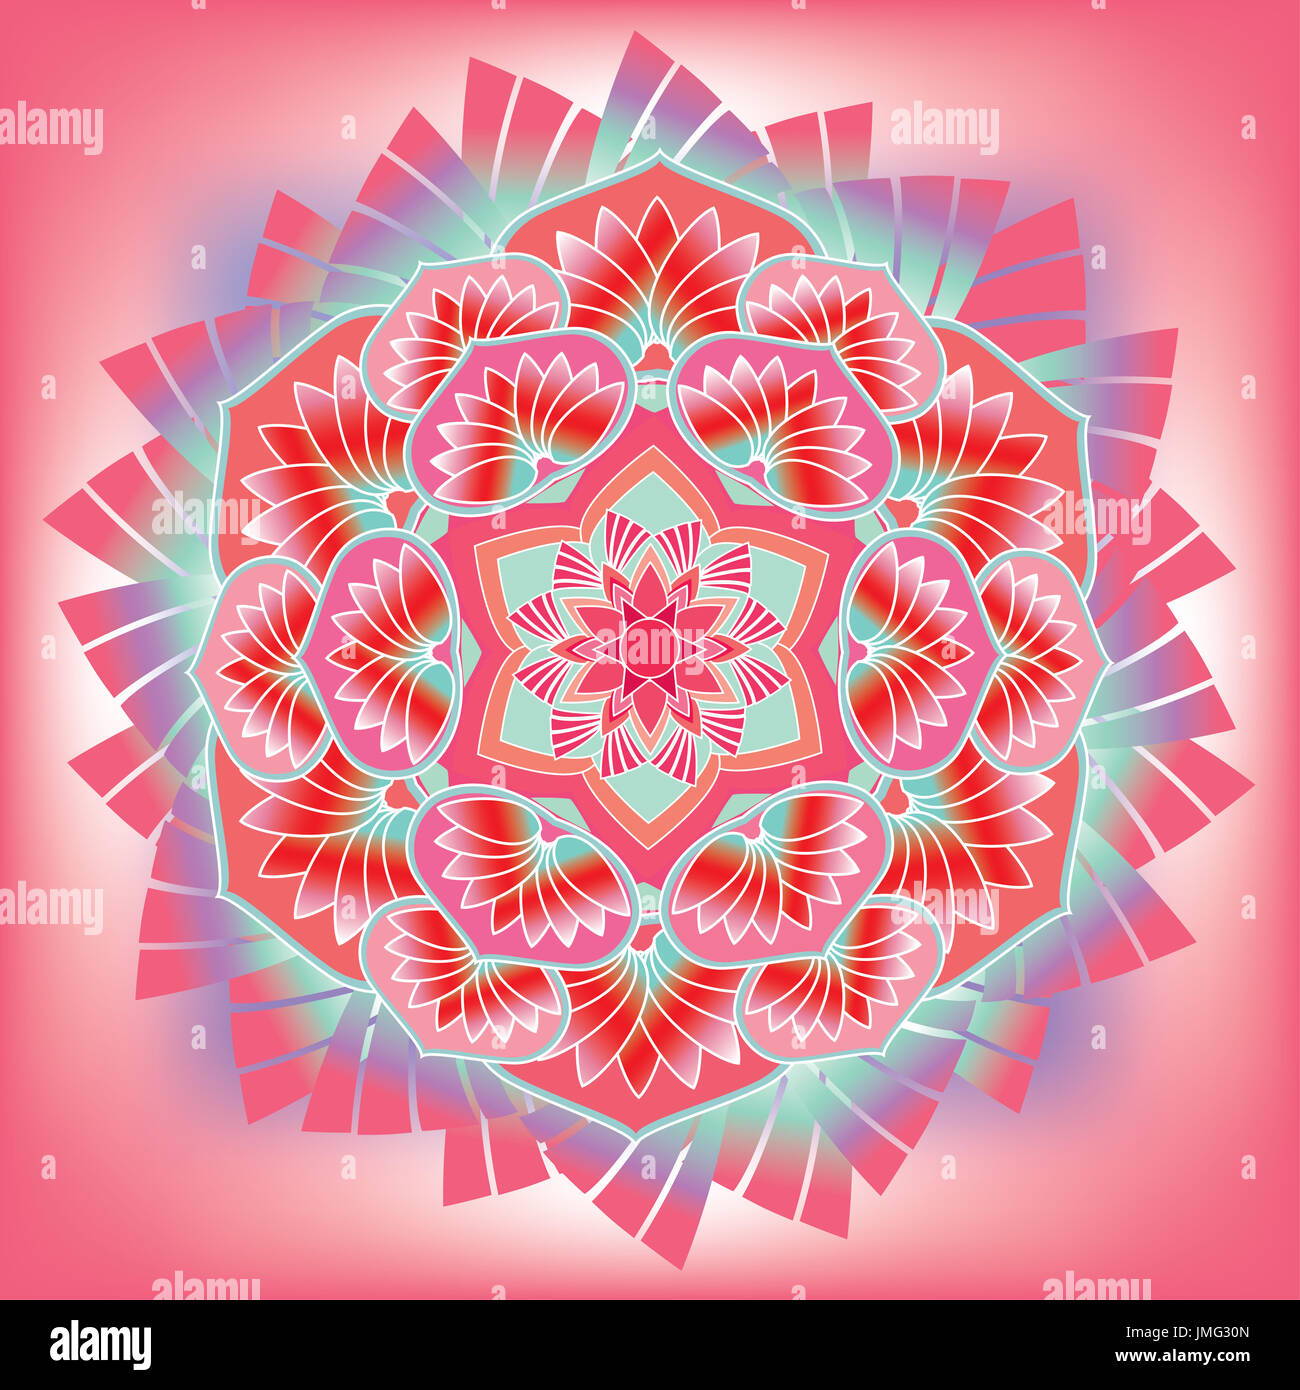 Colorful floral pattern Stock Photo